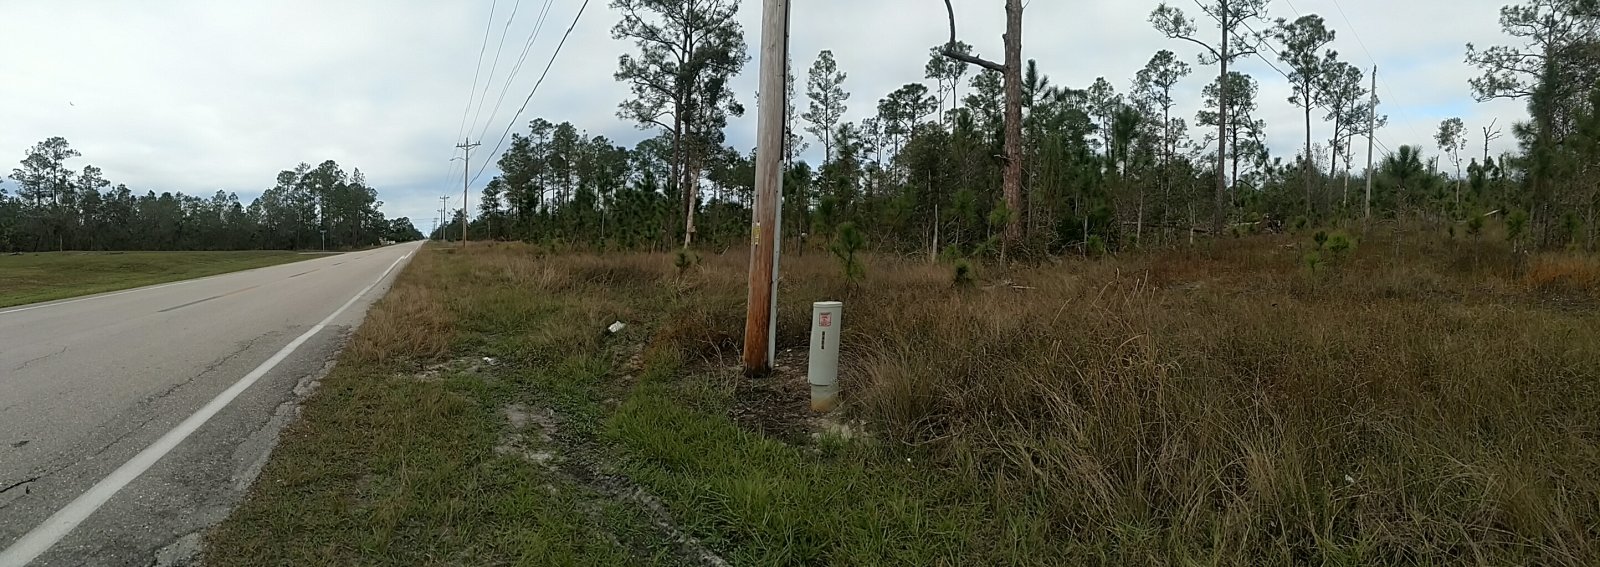 Buildable Lehigh Acres Lot Available Now!!!